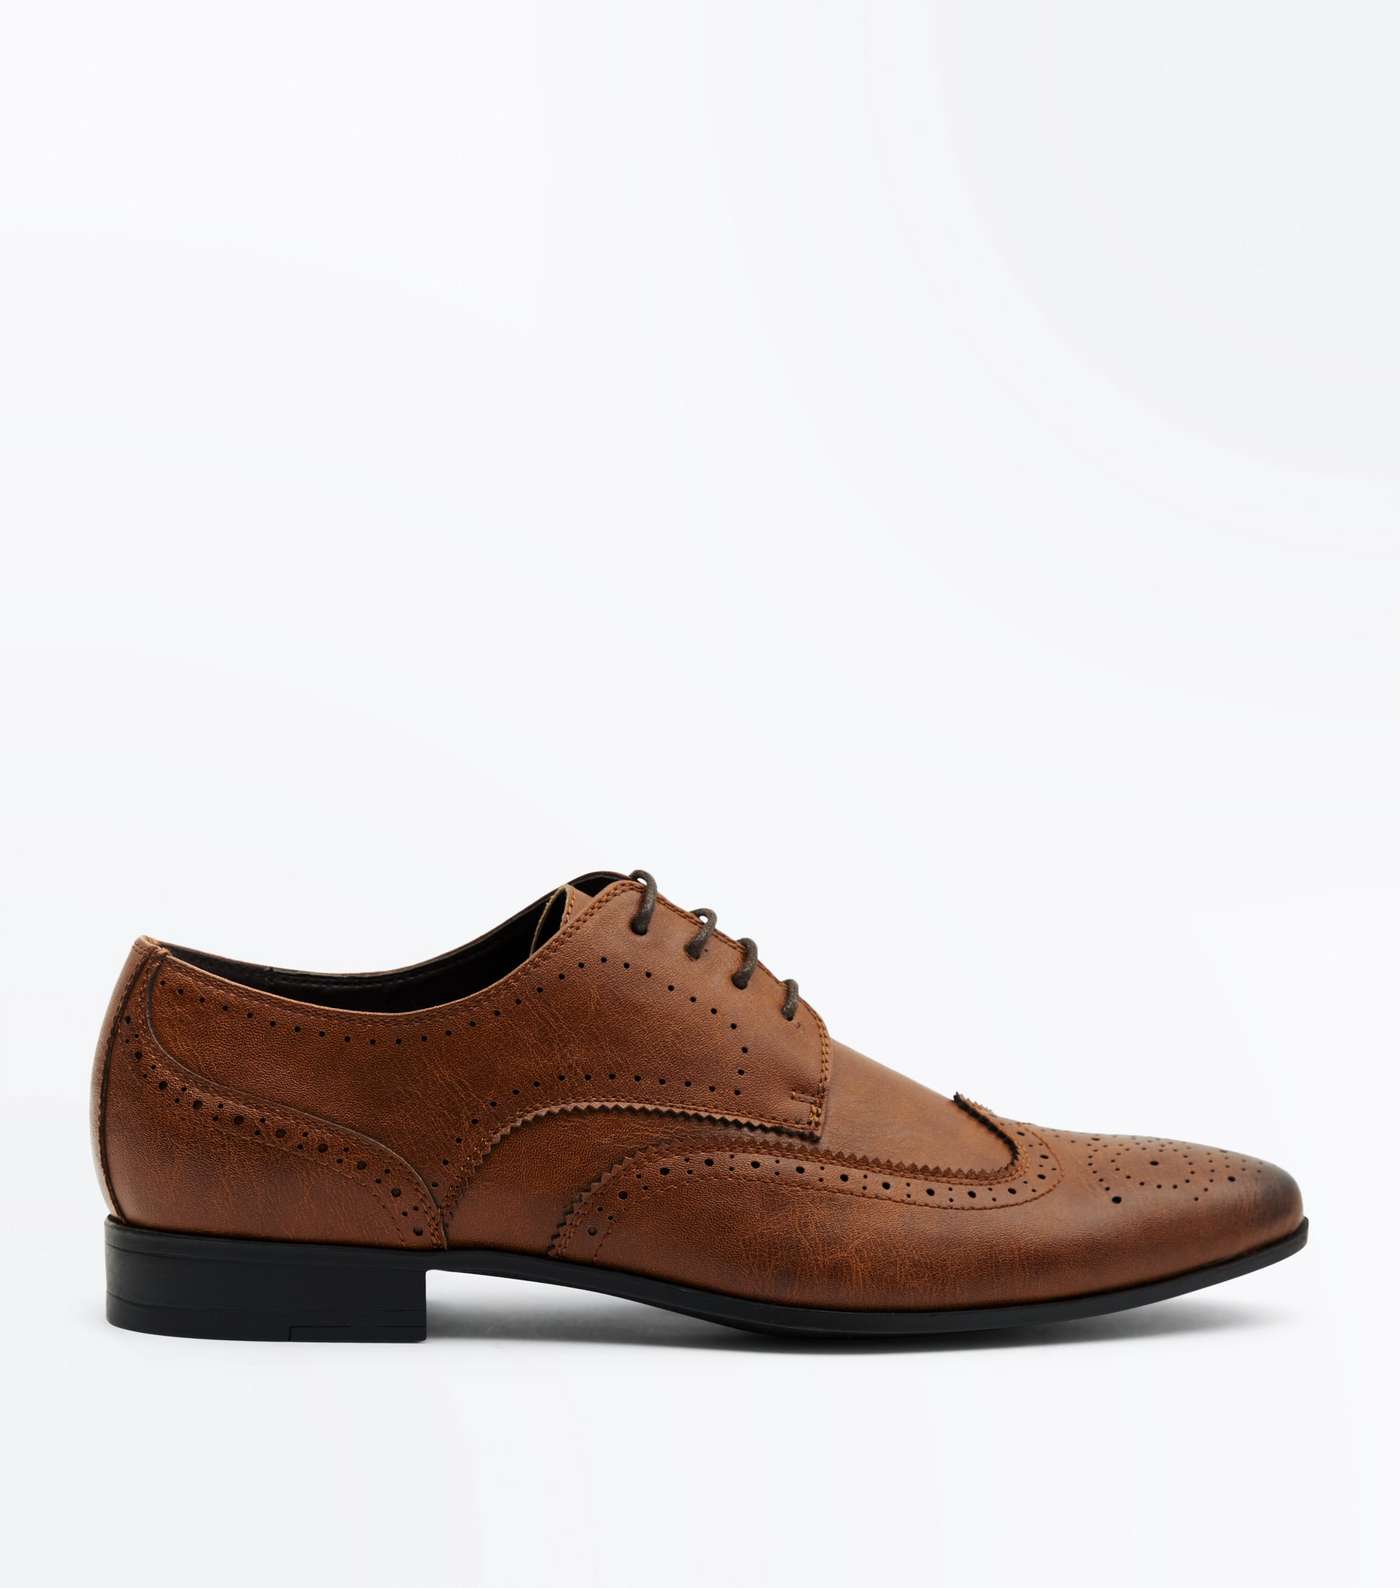 Tan Perforated Lace Up Brogues Image 2